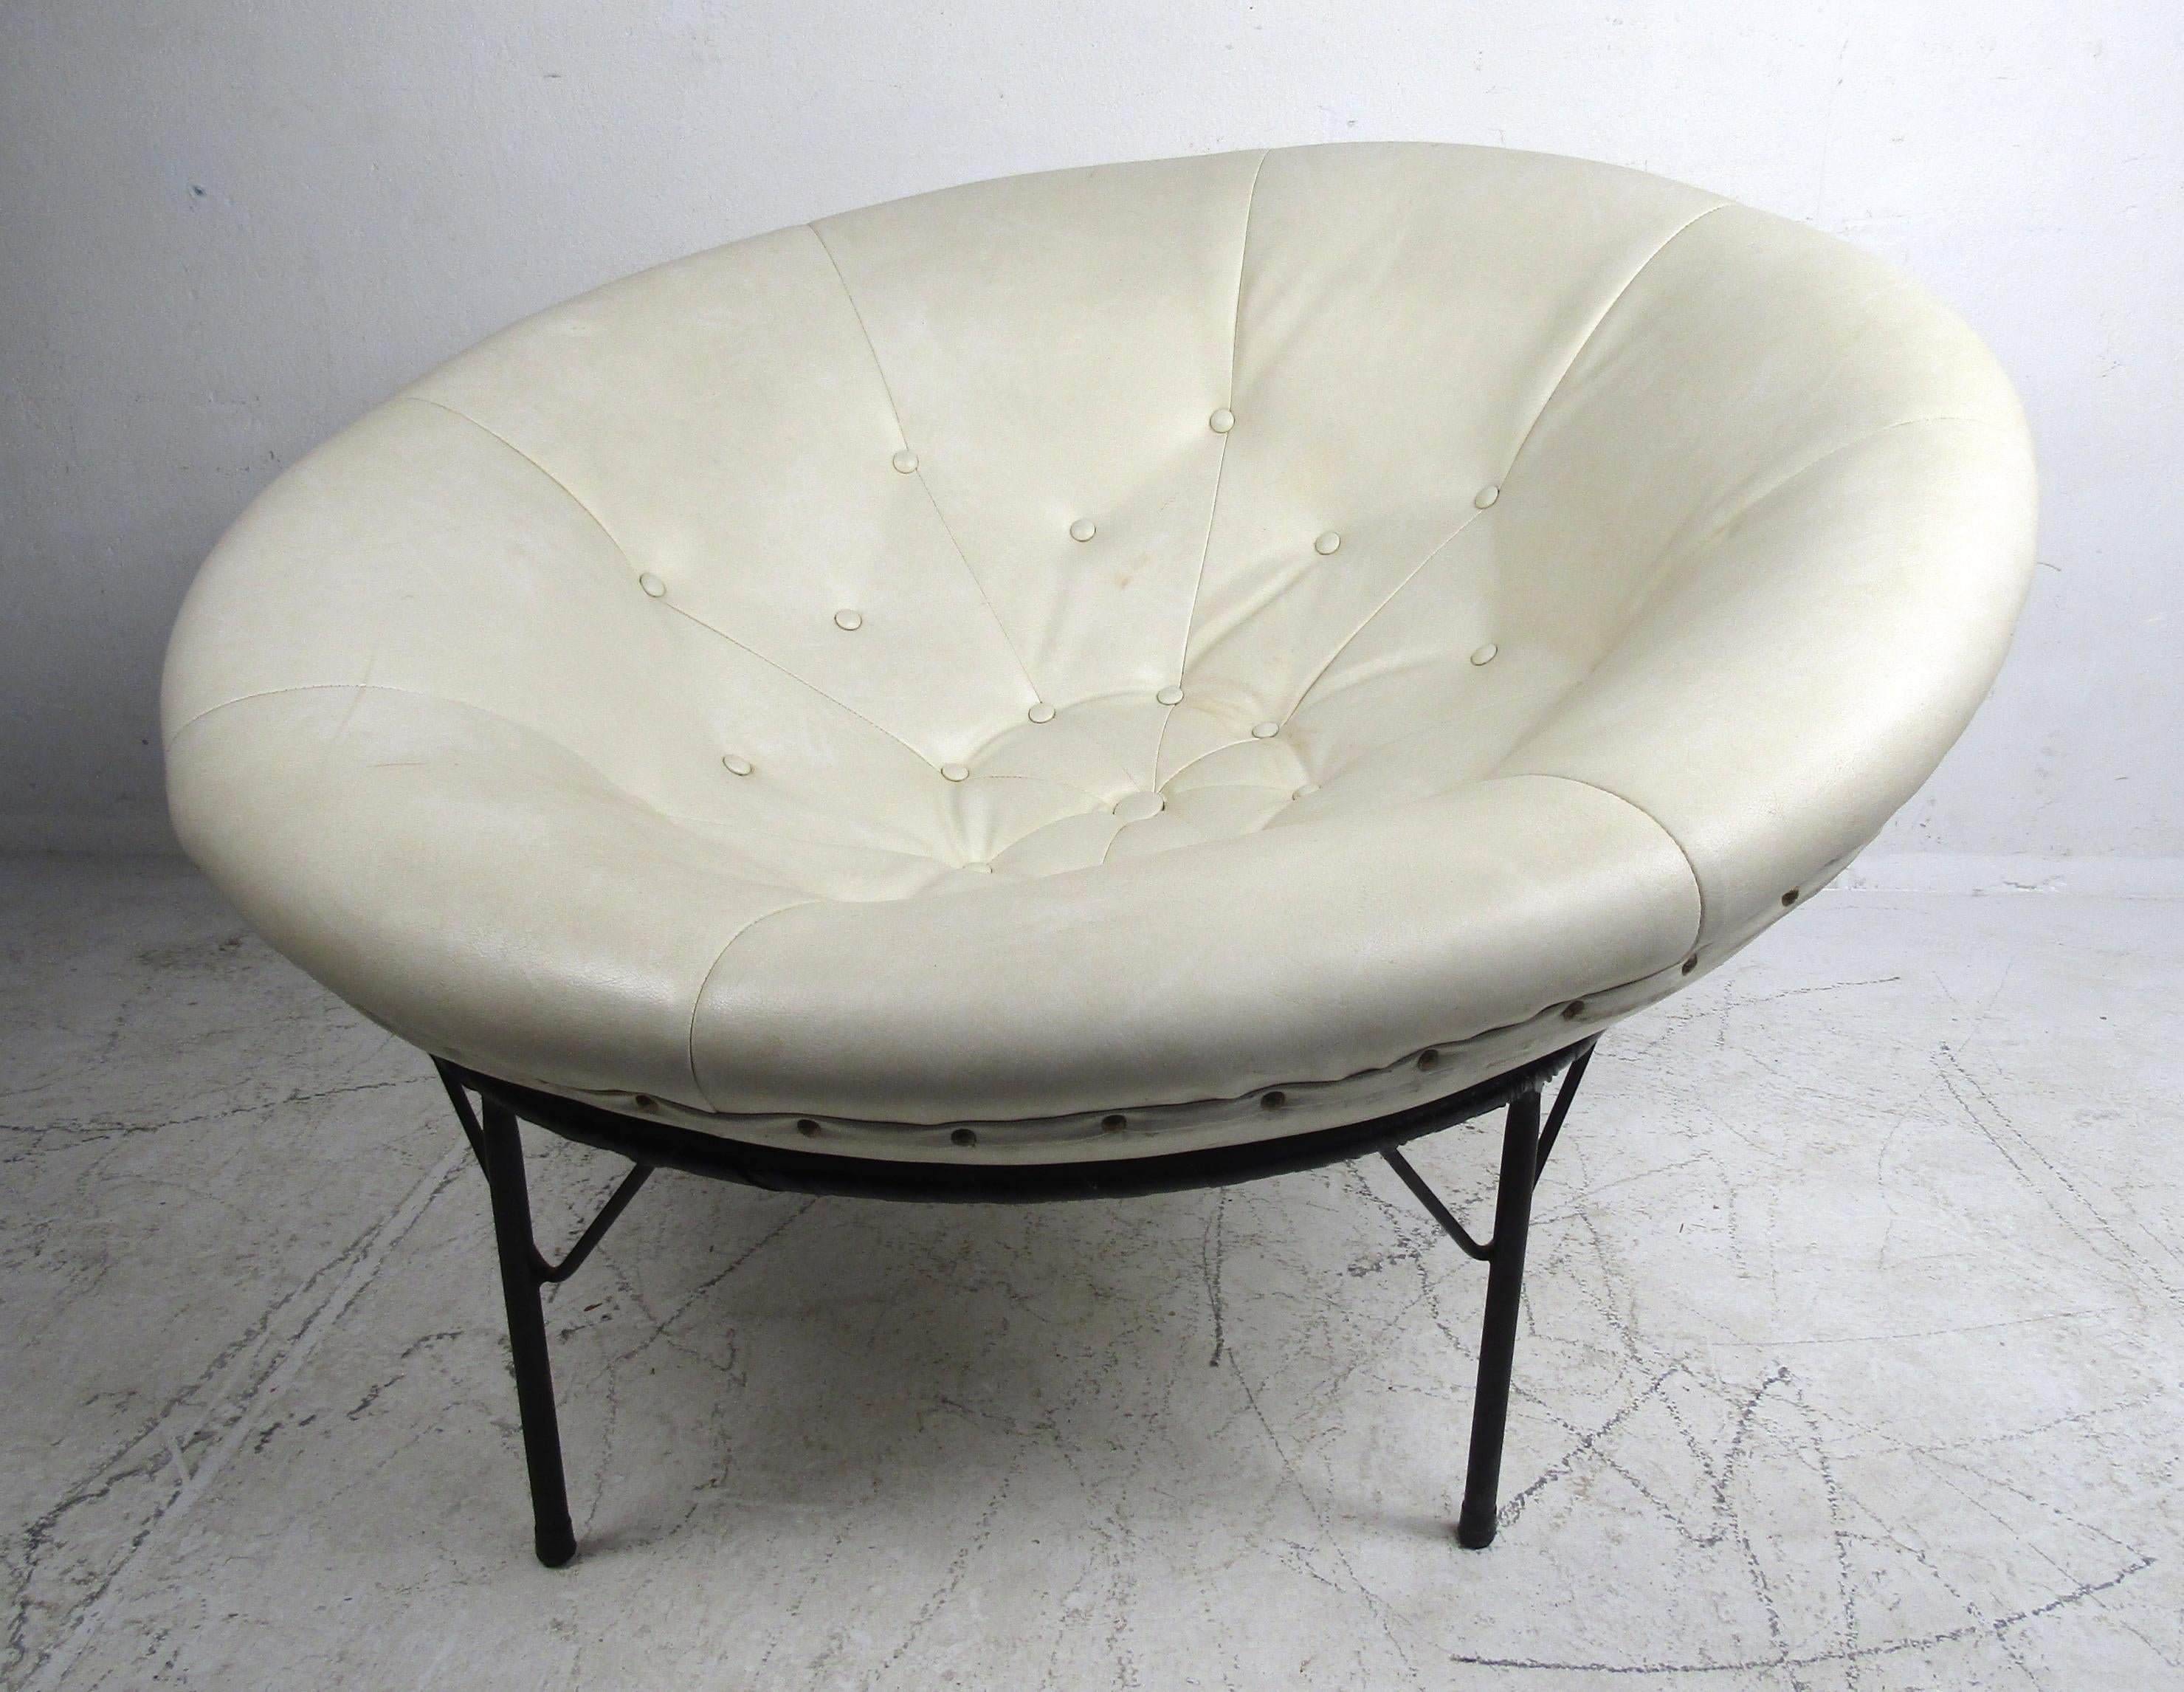 This stunning vintage modern bowl chair has a unique design that allows a large circular leather seat to rest inside of a sturdy round base. The tufted white leather seat contours the body perfectly ensuring maximum comfort. Please confirm item